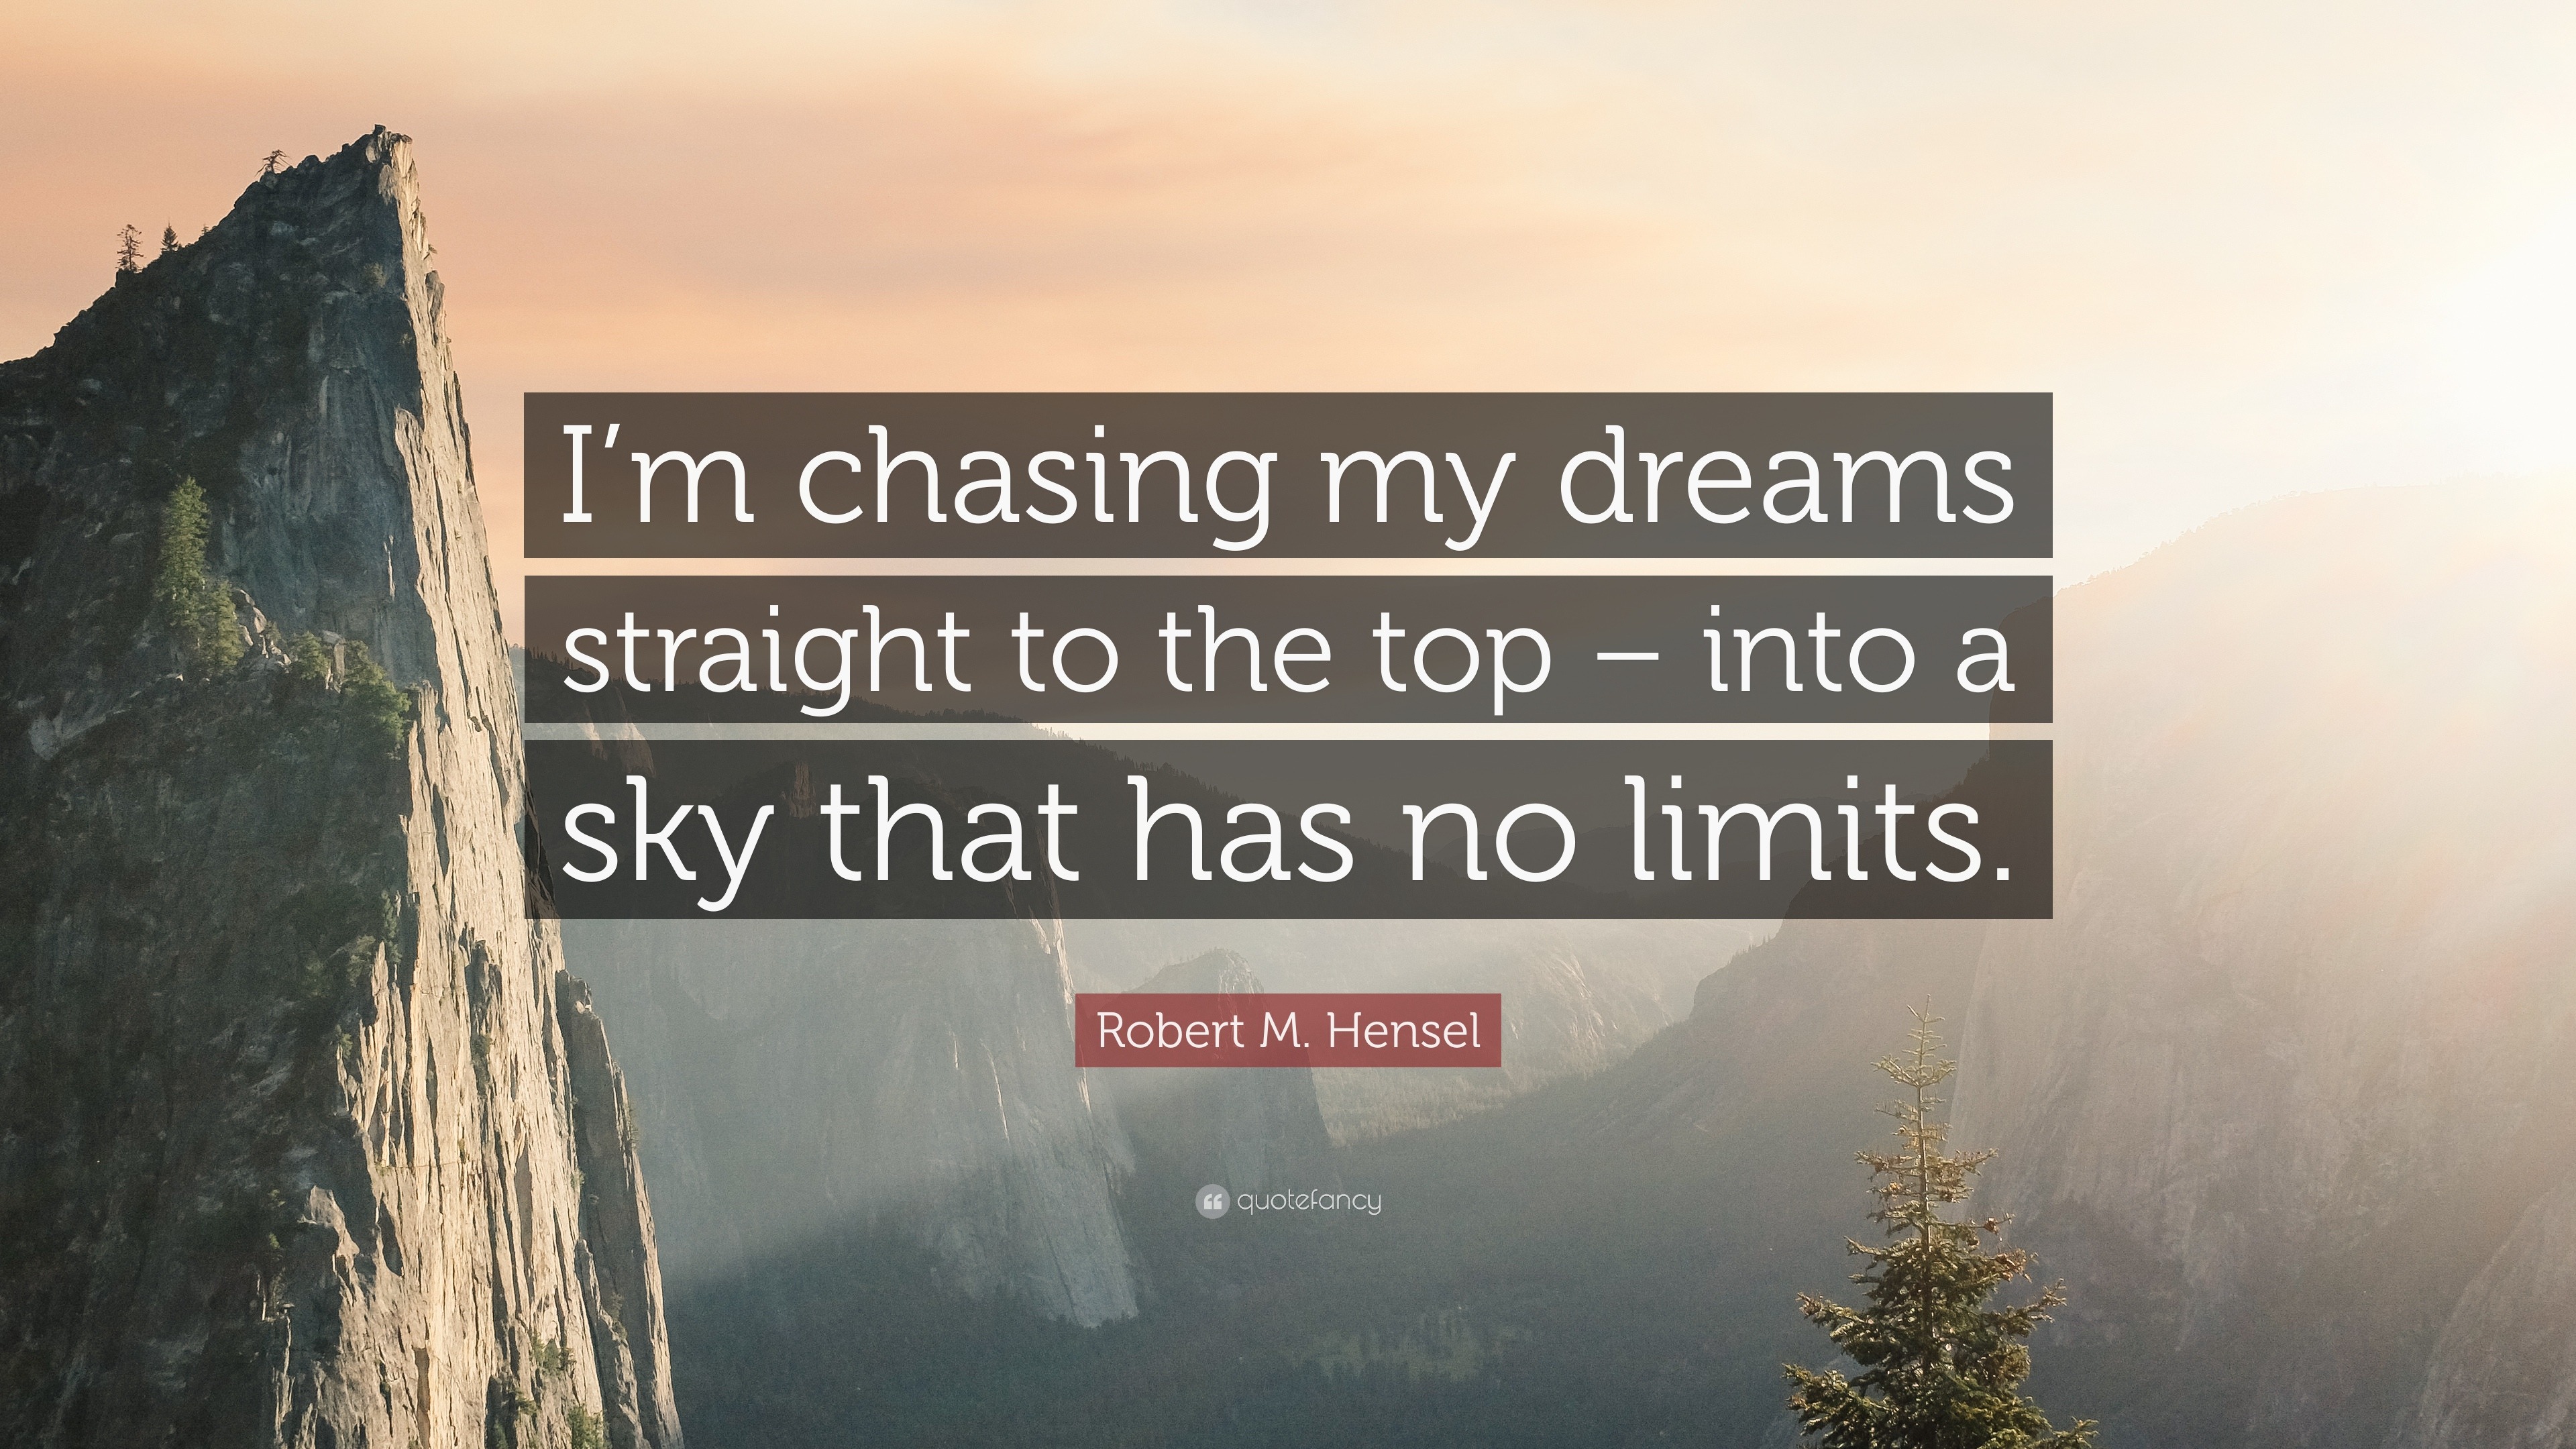 Robert M. Hensel Quote: “I’m chasing my dreams straight to the top